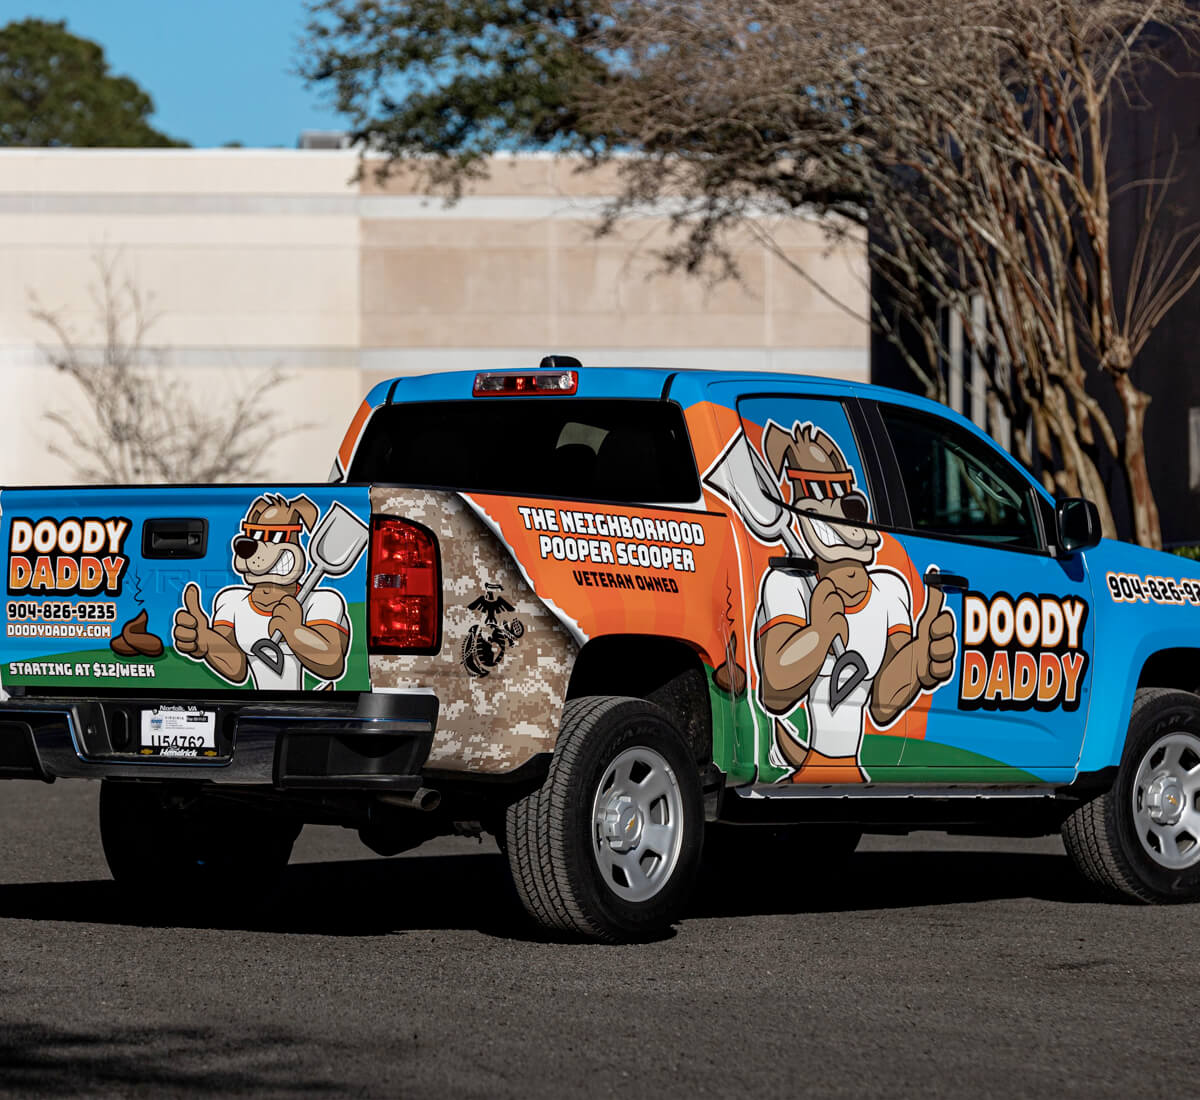 Chevrolet truck wrapped with a local business advertisement.